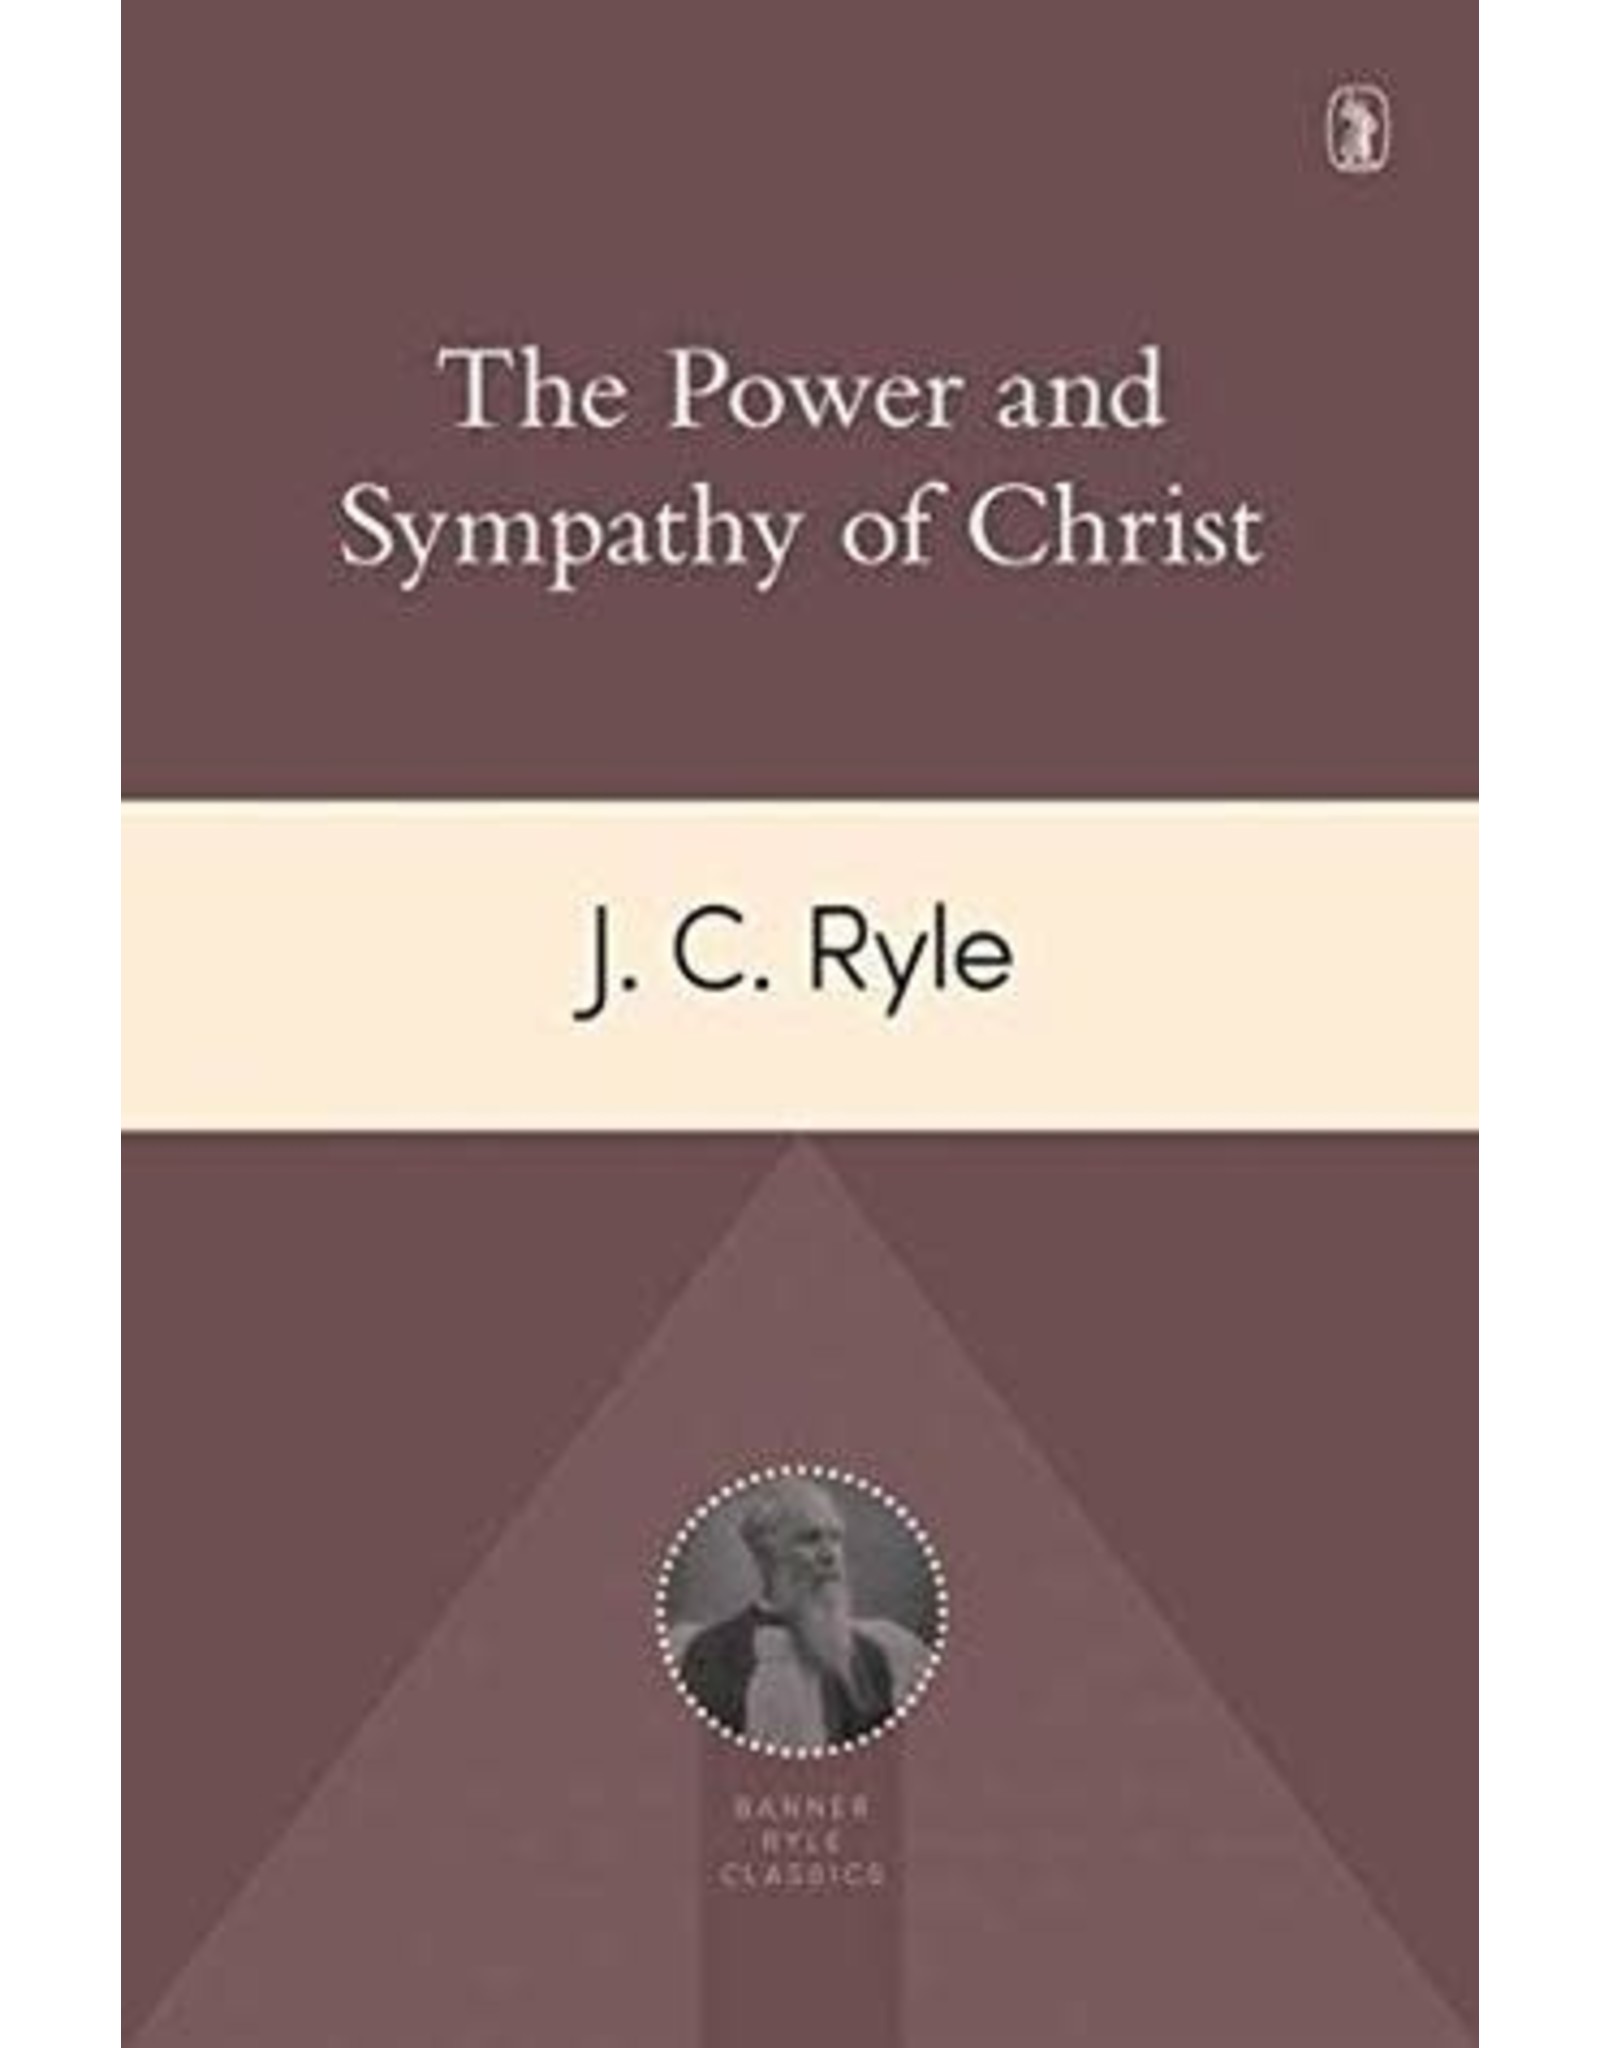 J. C. Ryle The Power and Sympathy of Christ